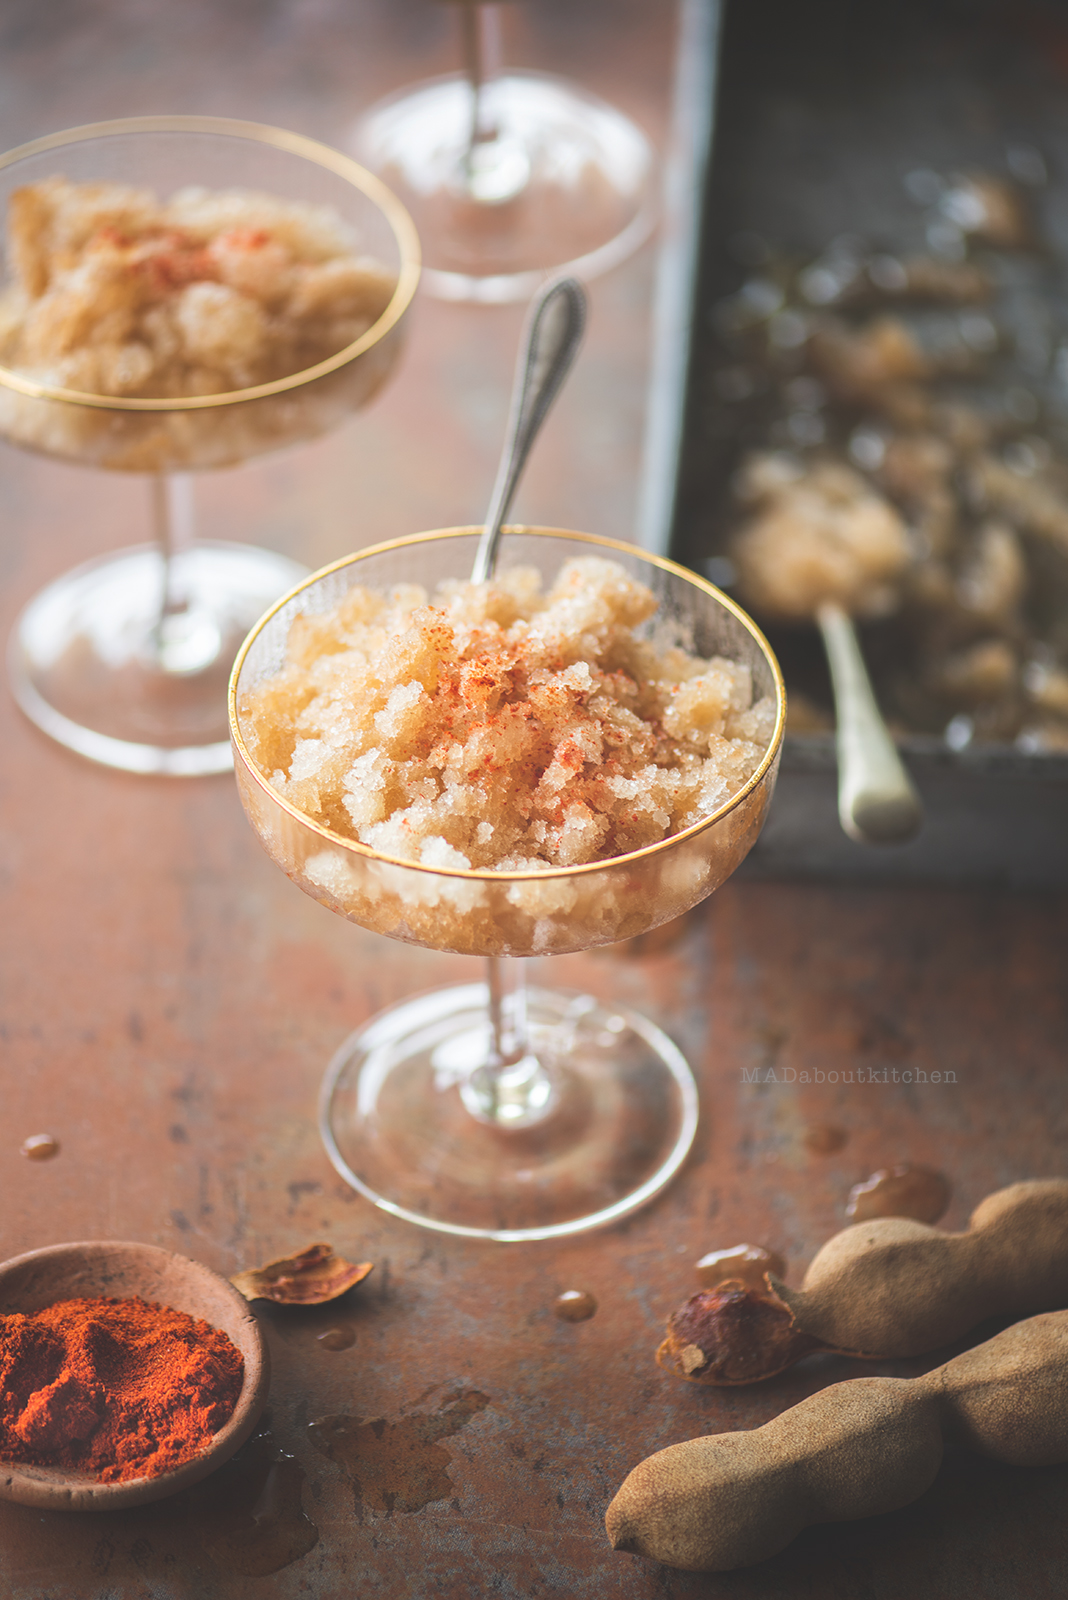 Imli granita , Tamarind granita has a perfect combination of Tangy, sweet, spice and is totally lip smacking. This granita is perfect for scorching summer.